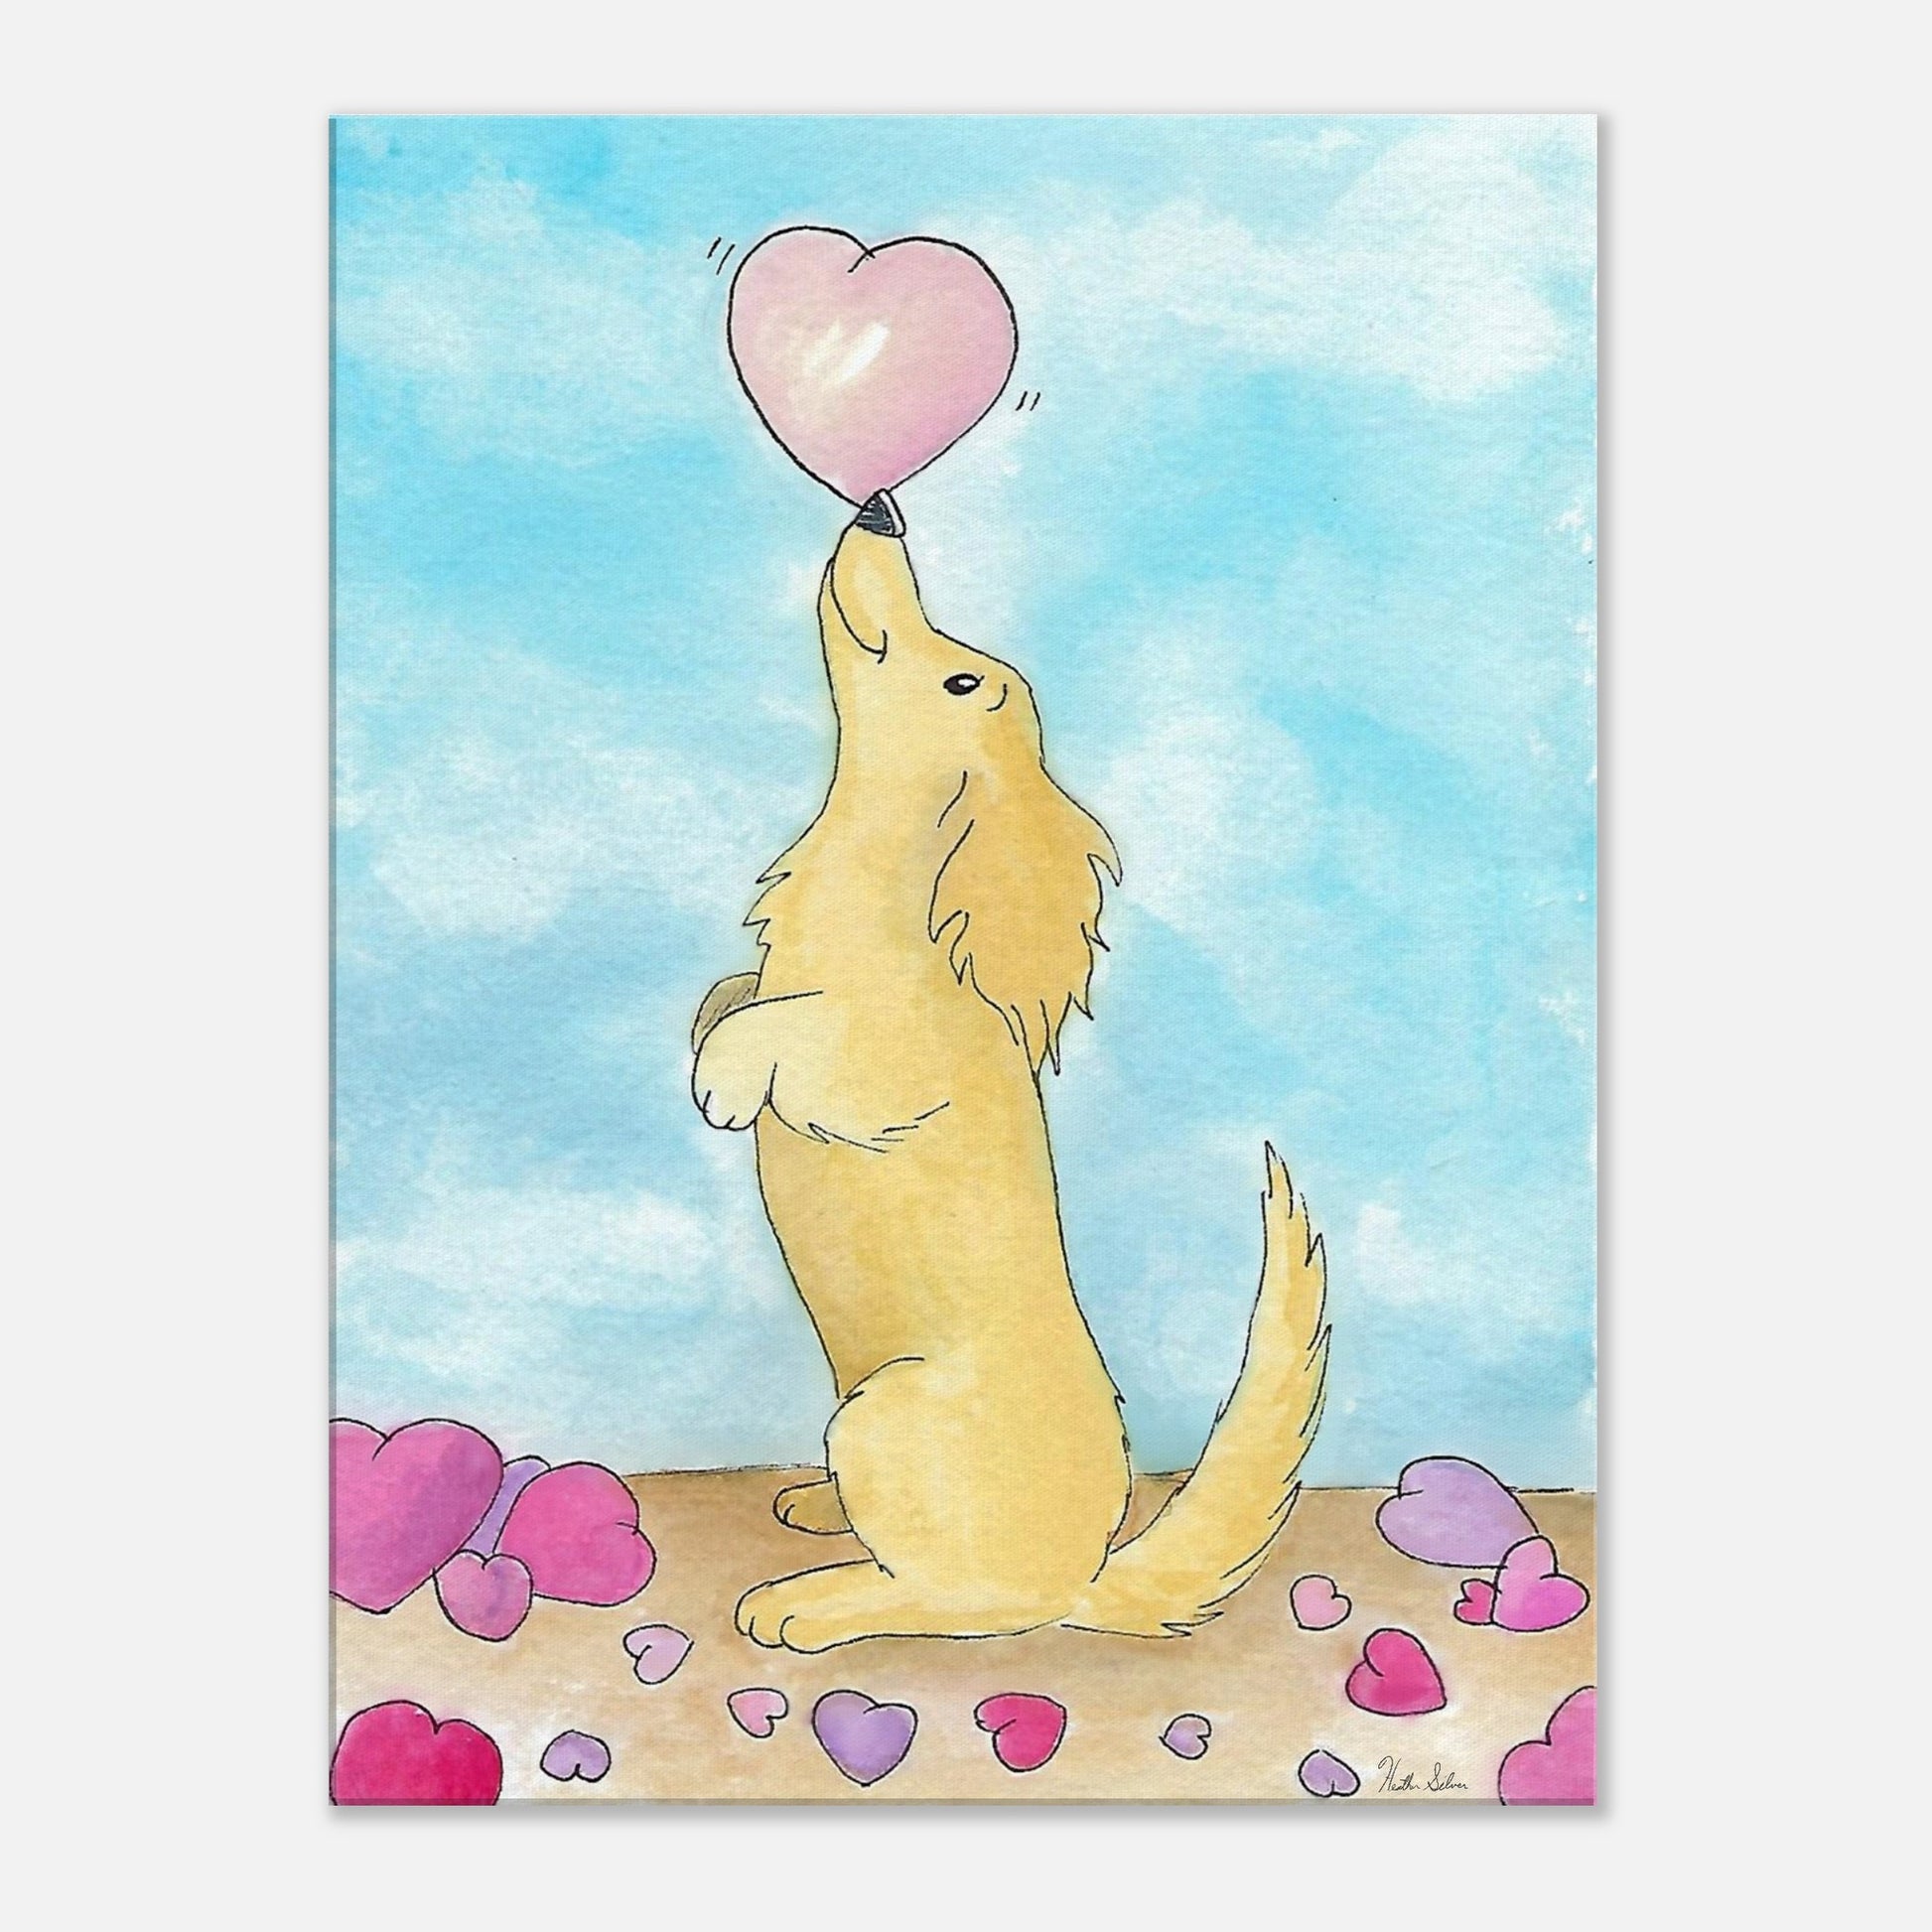 24 by 32 inch canvas wall art print of Heather Silver's watercolor painting, Puppy Love. It features a cute dog balancing a pink heart on its nose against a blue sky background.